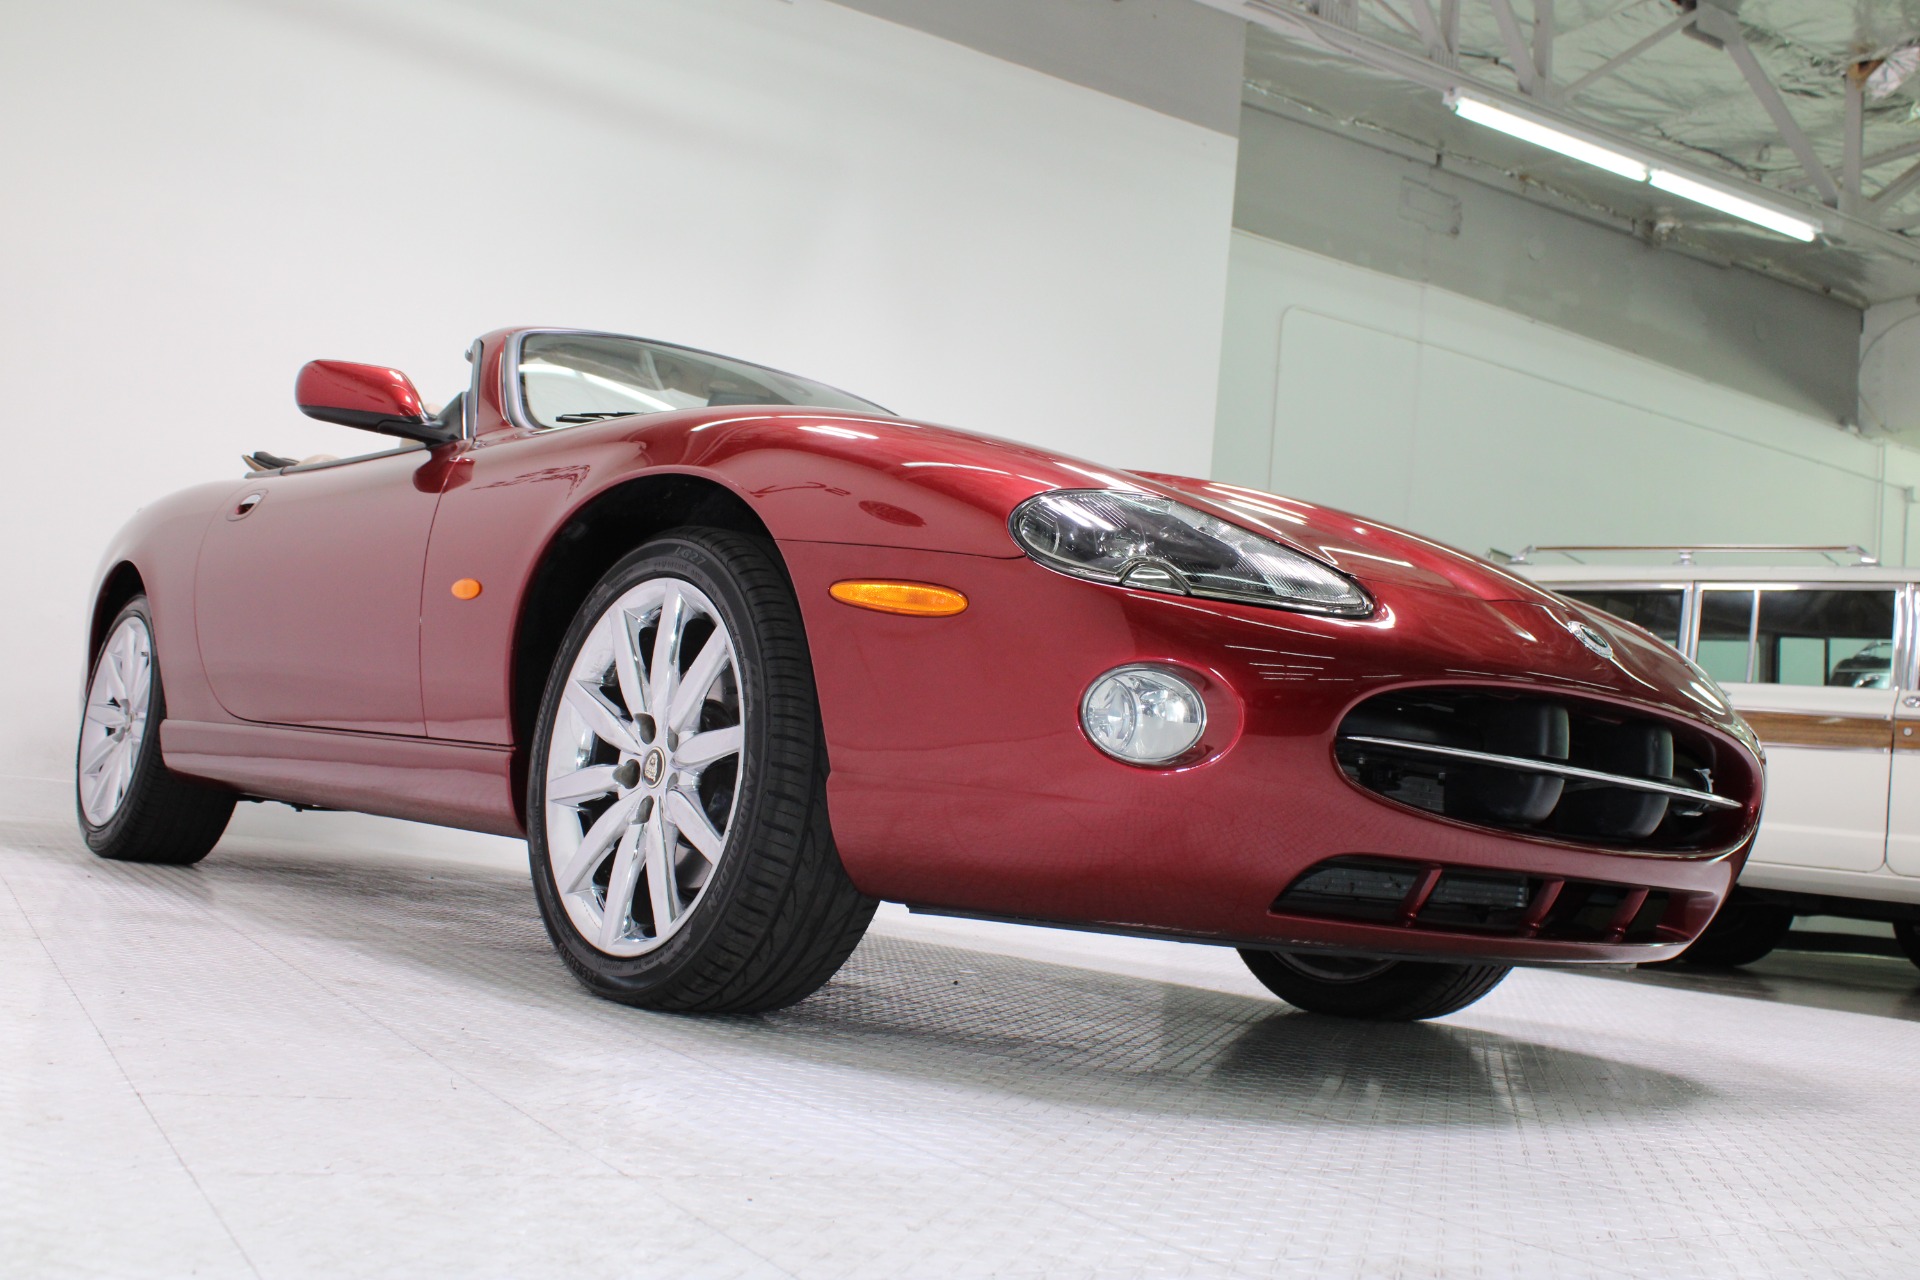 Used-2006-Jaguar-XK8-Victory-Edition-Convertible-Toyota